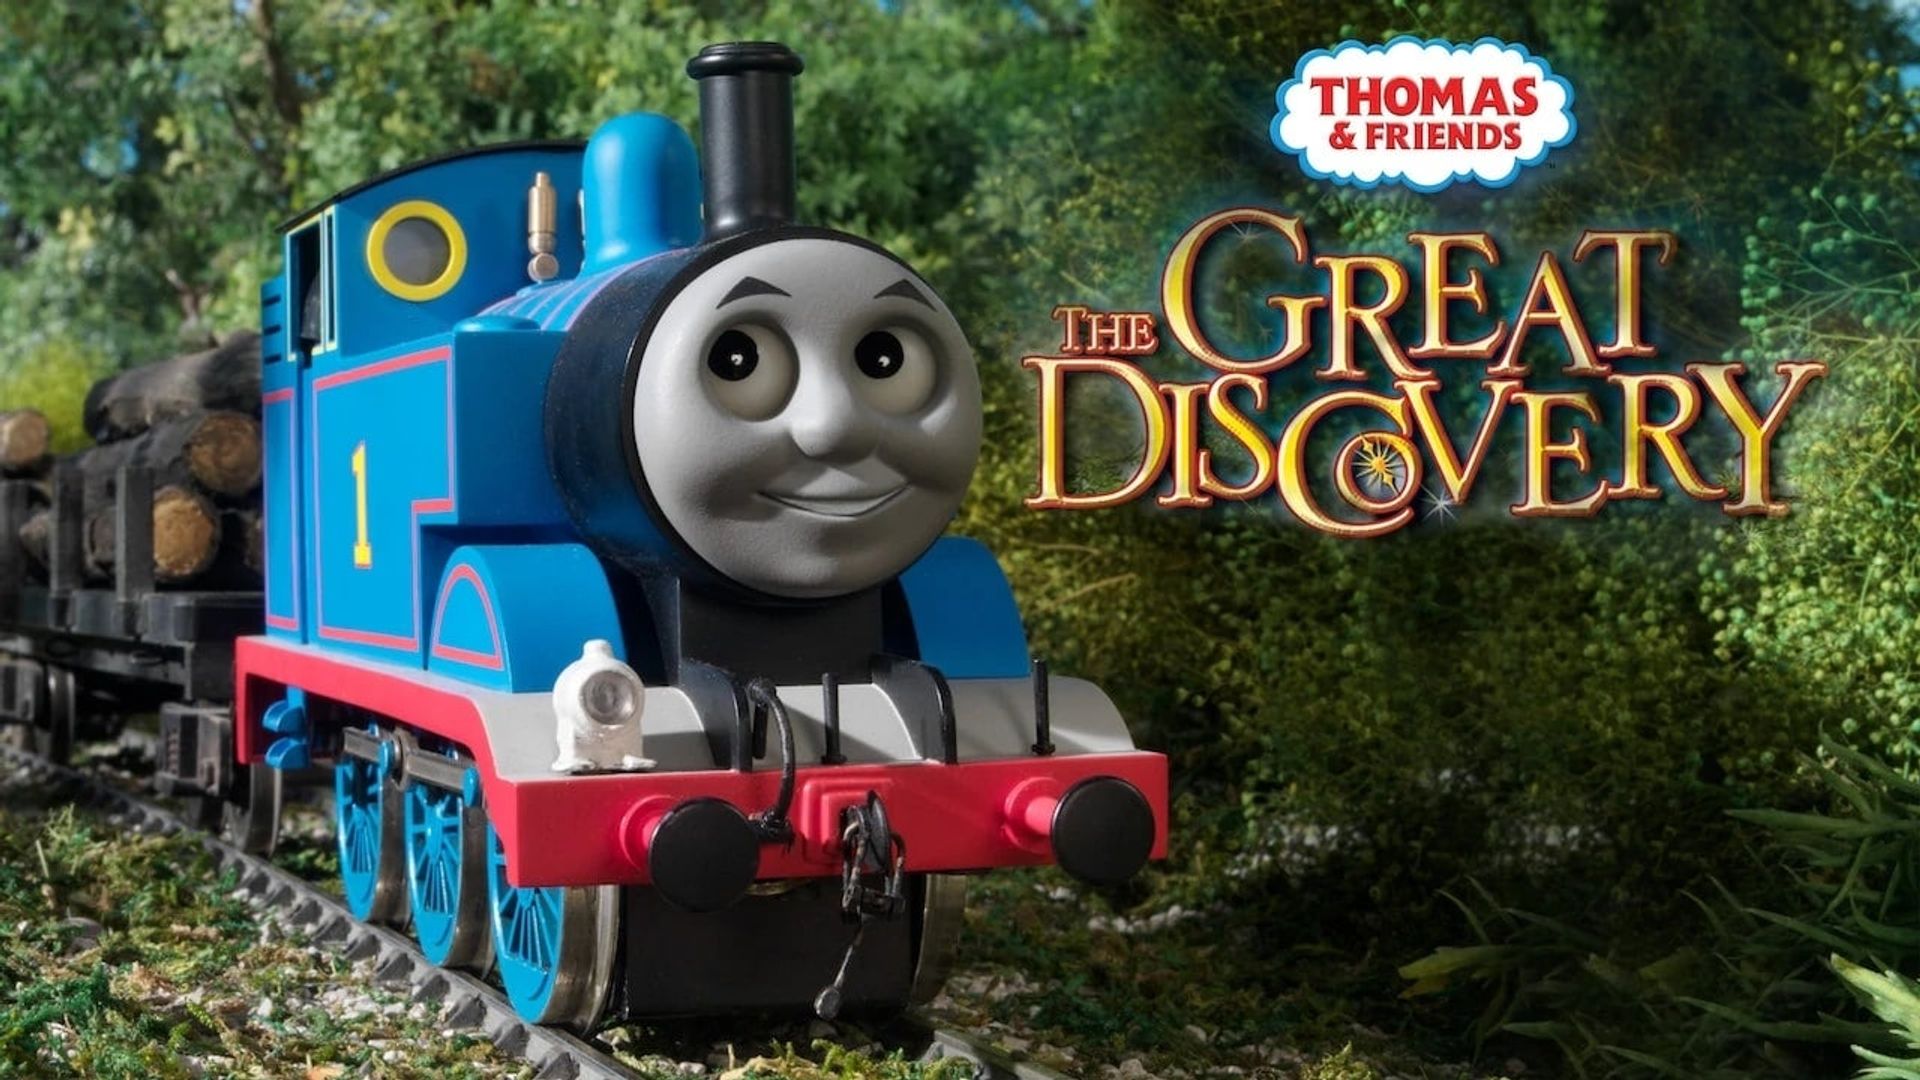 Thomas & Friends: The Great Discovery - The Movie background